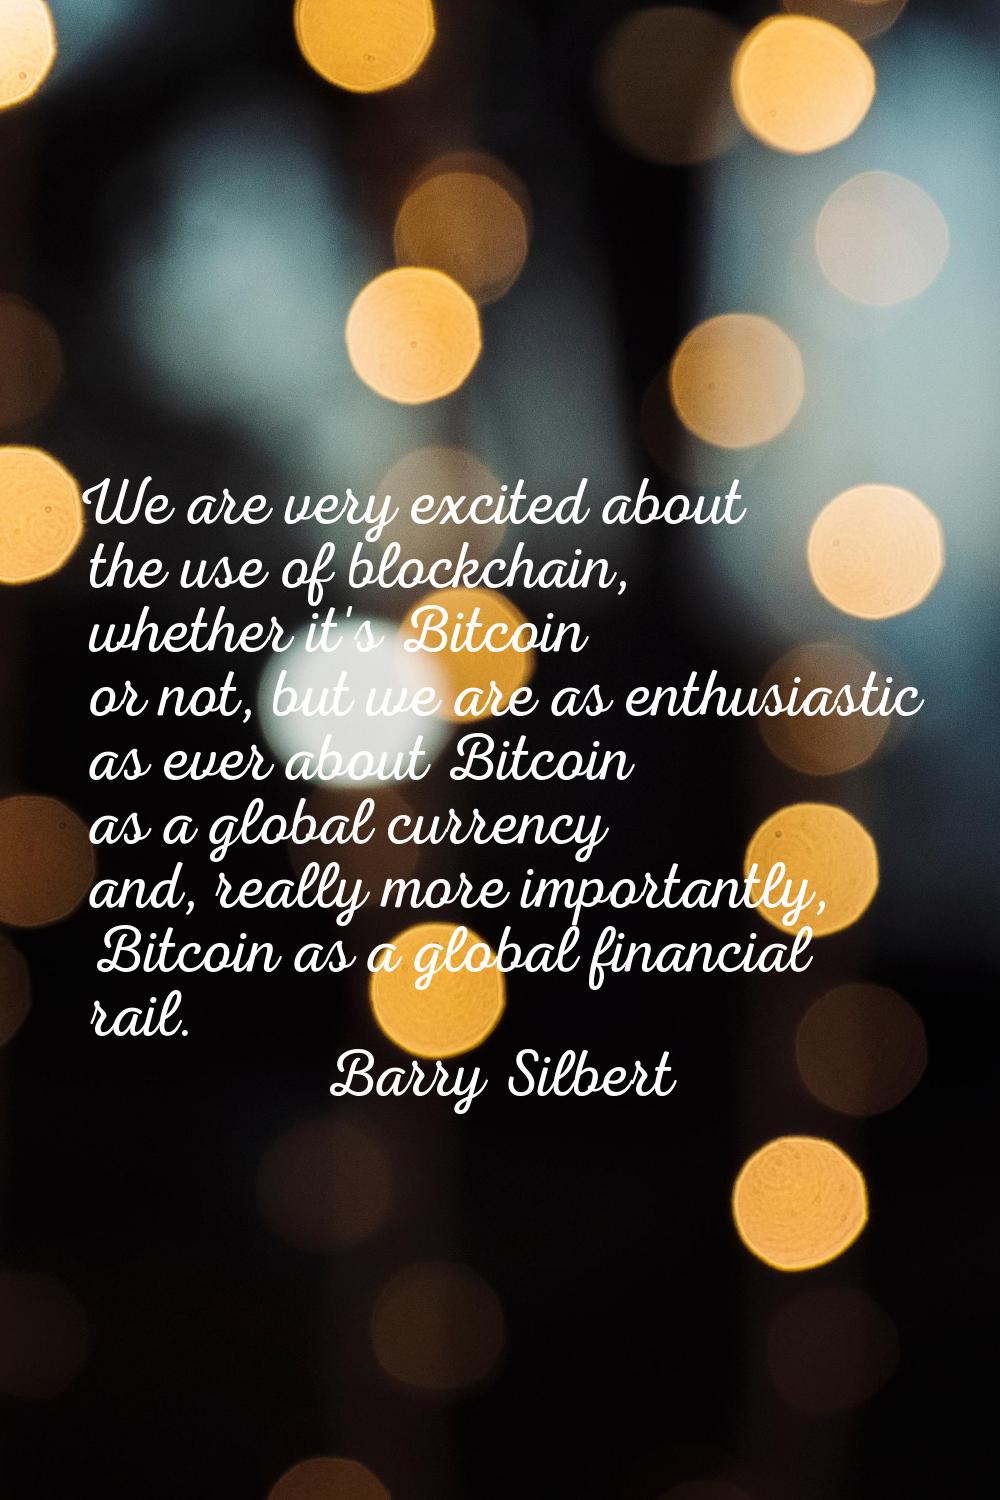 We are very excited about the use of blockchain, whether it's Bitcoin or not, but we are as enthusi